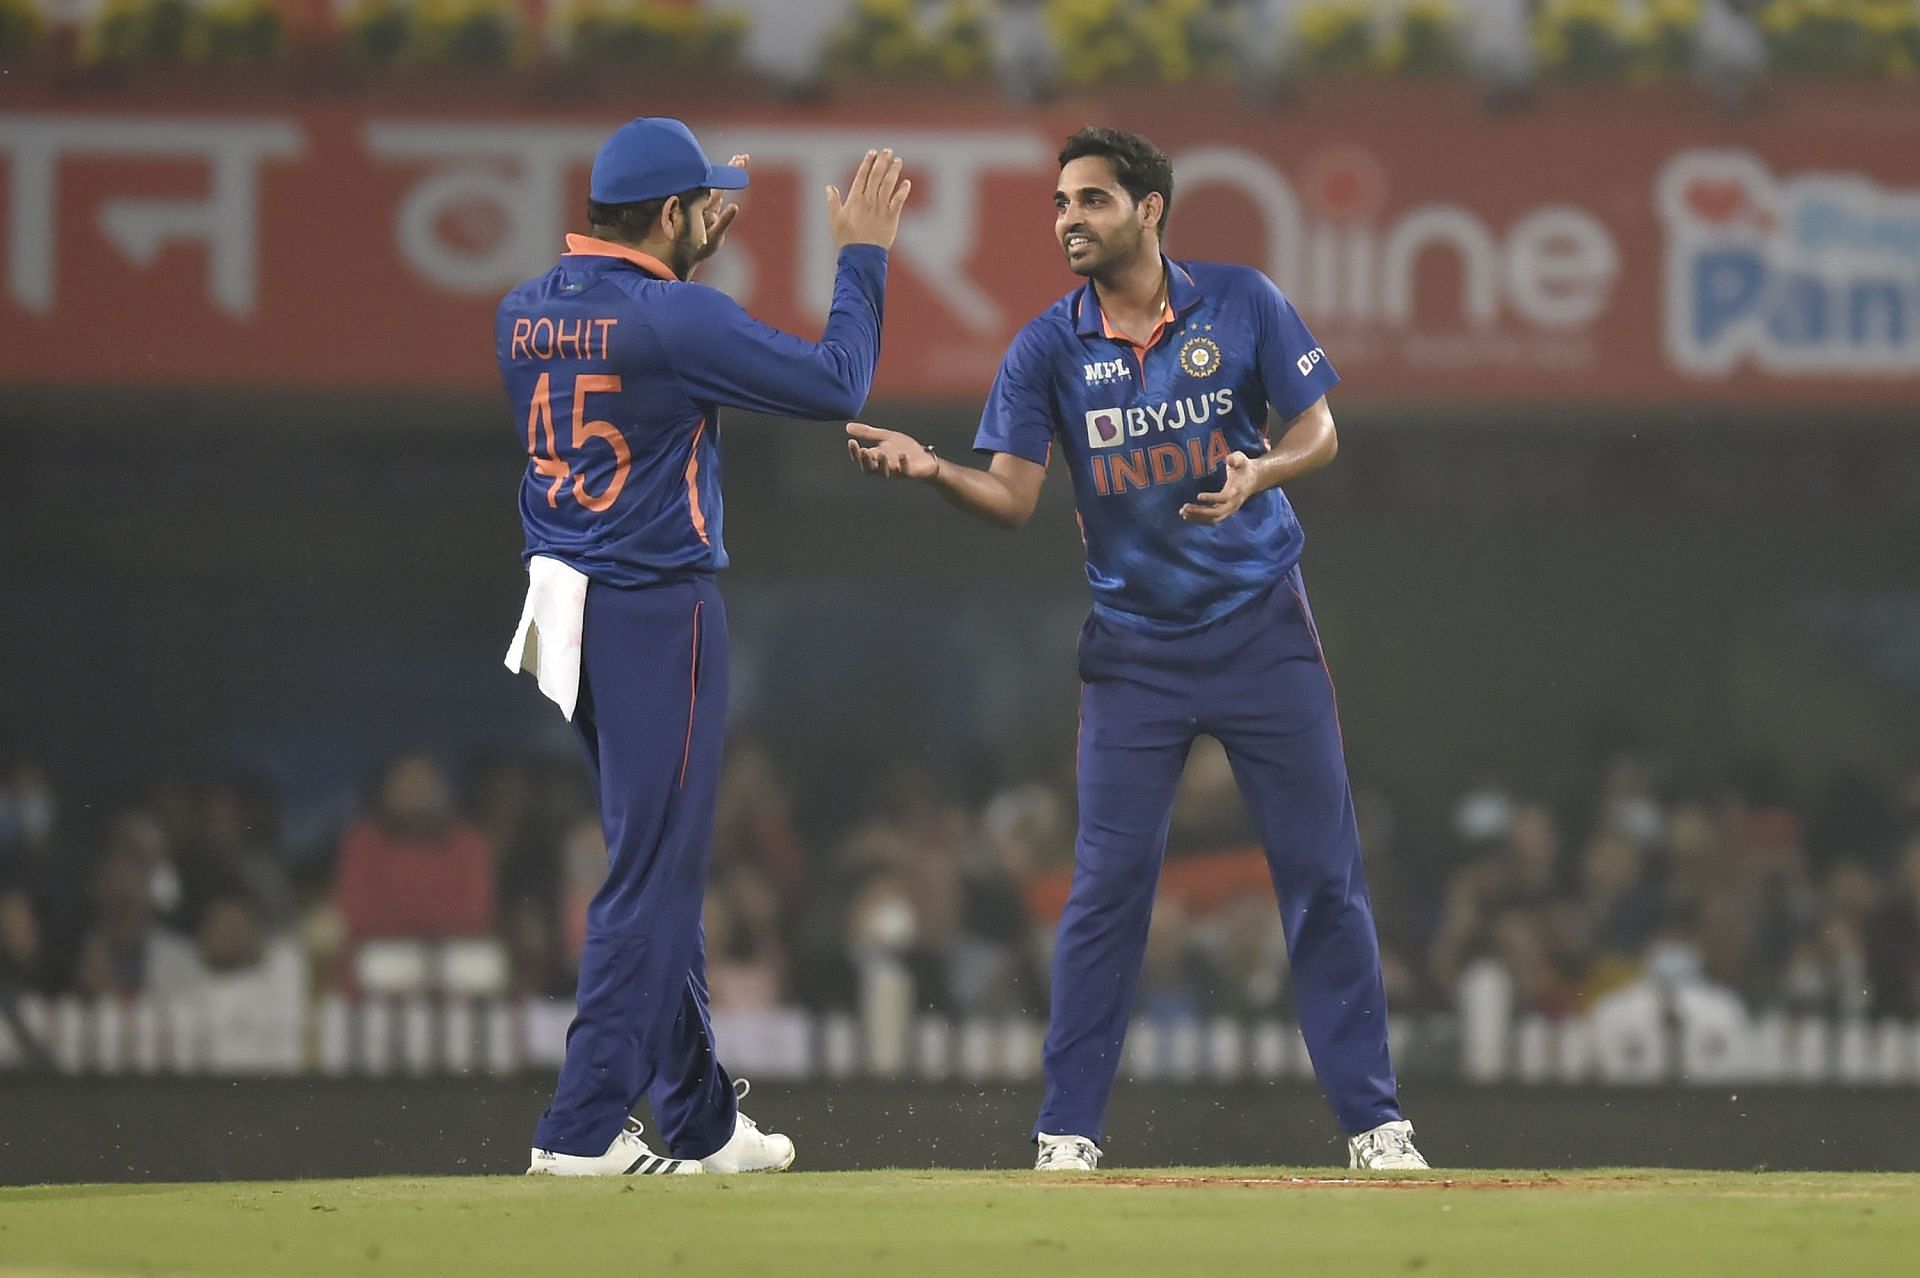 Bhuvneshwar Kumar is likely to share the new ball with Jasprit Bumrah